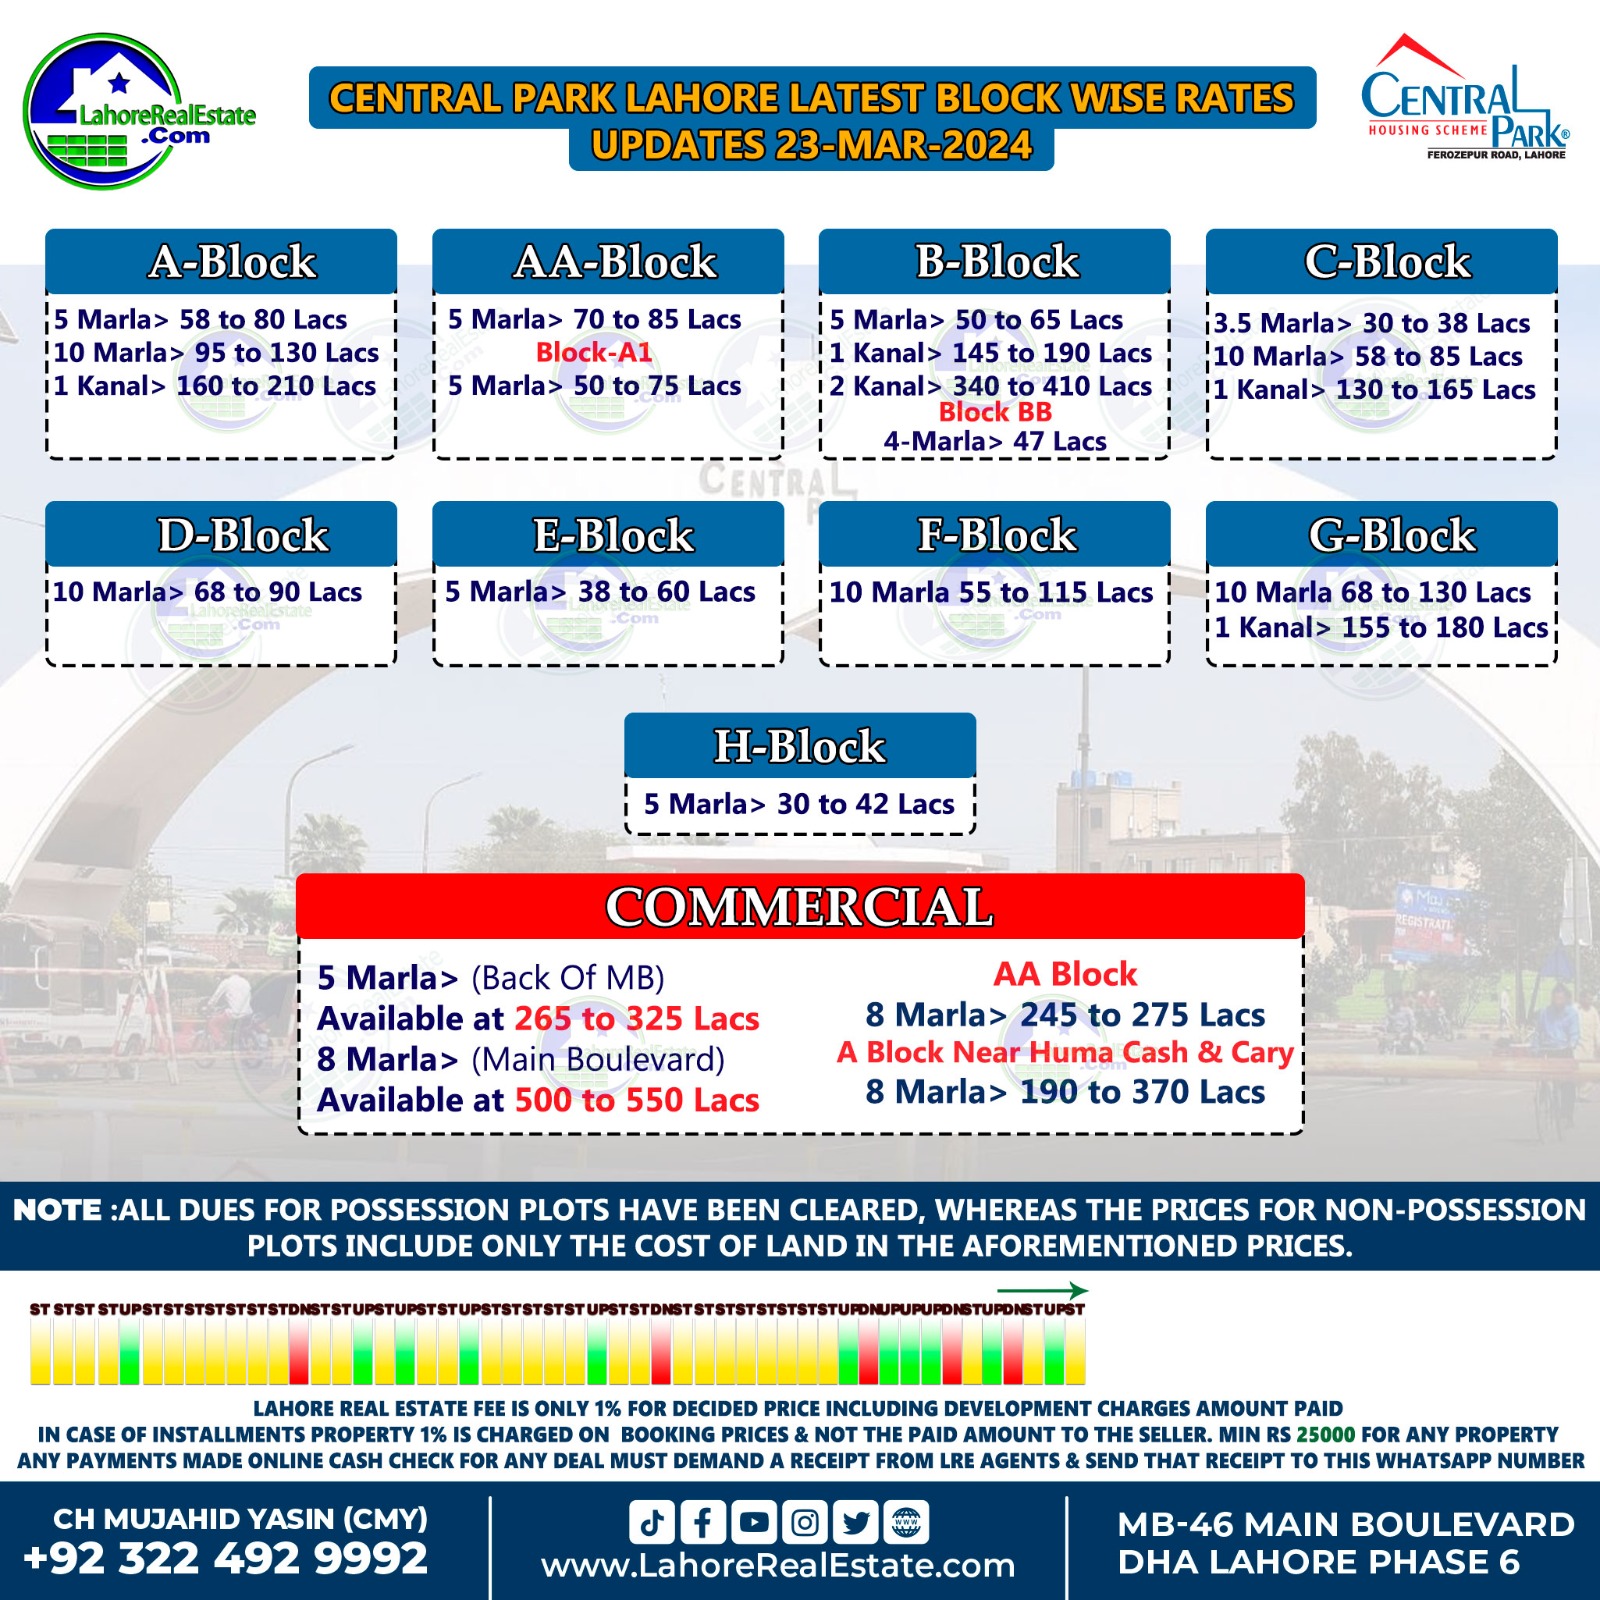 Central Park Lahore Plot Prices Update March 25, 2024